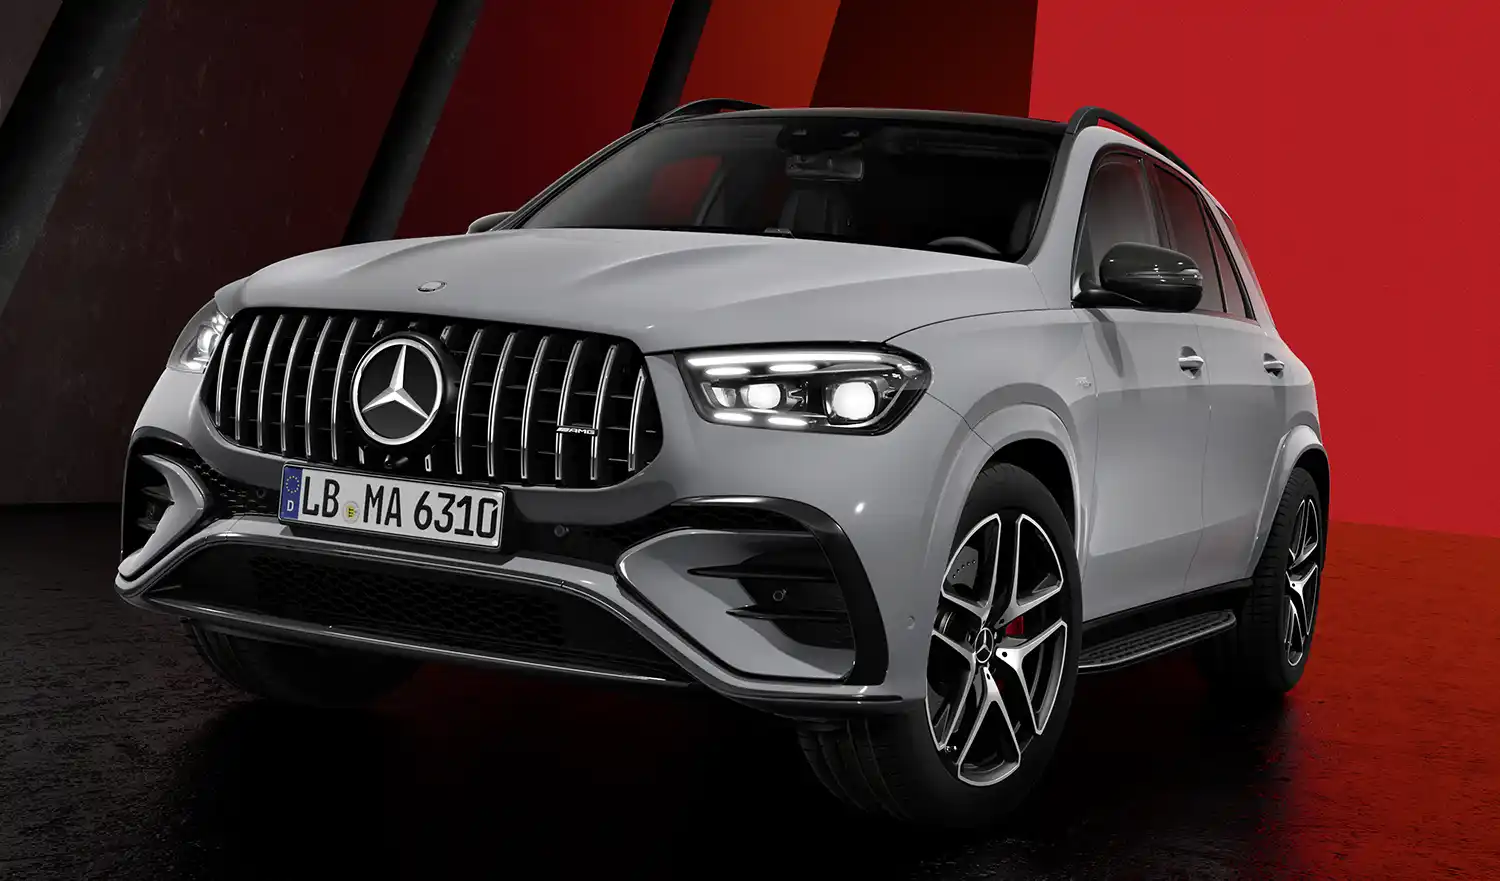 Revised GLE SUV And Coupé Models From Mercedes-Benz And Mercedes-AMG  Available To Order